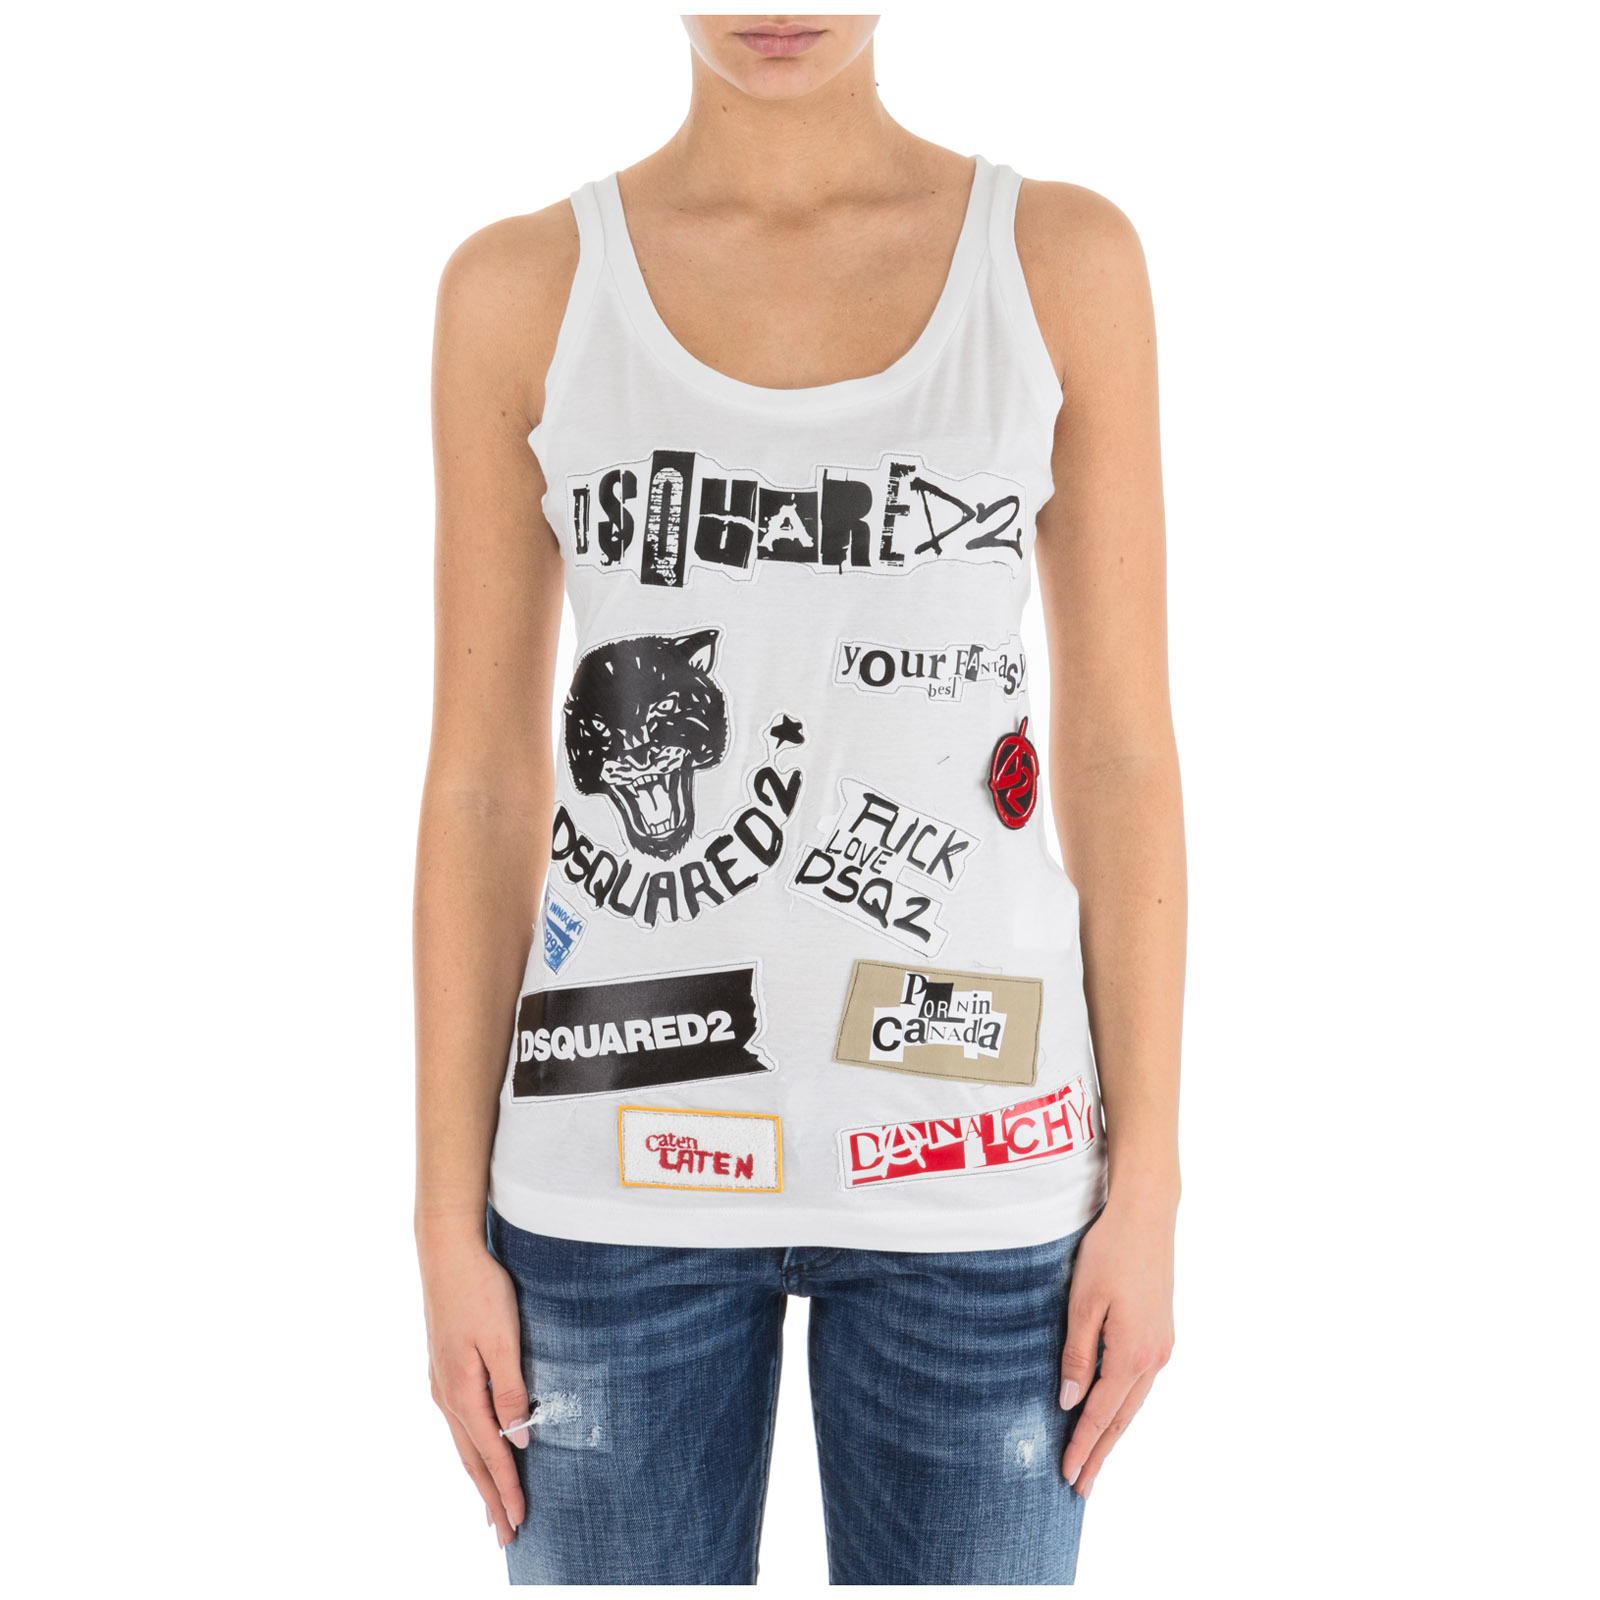 dsquared2 top womens